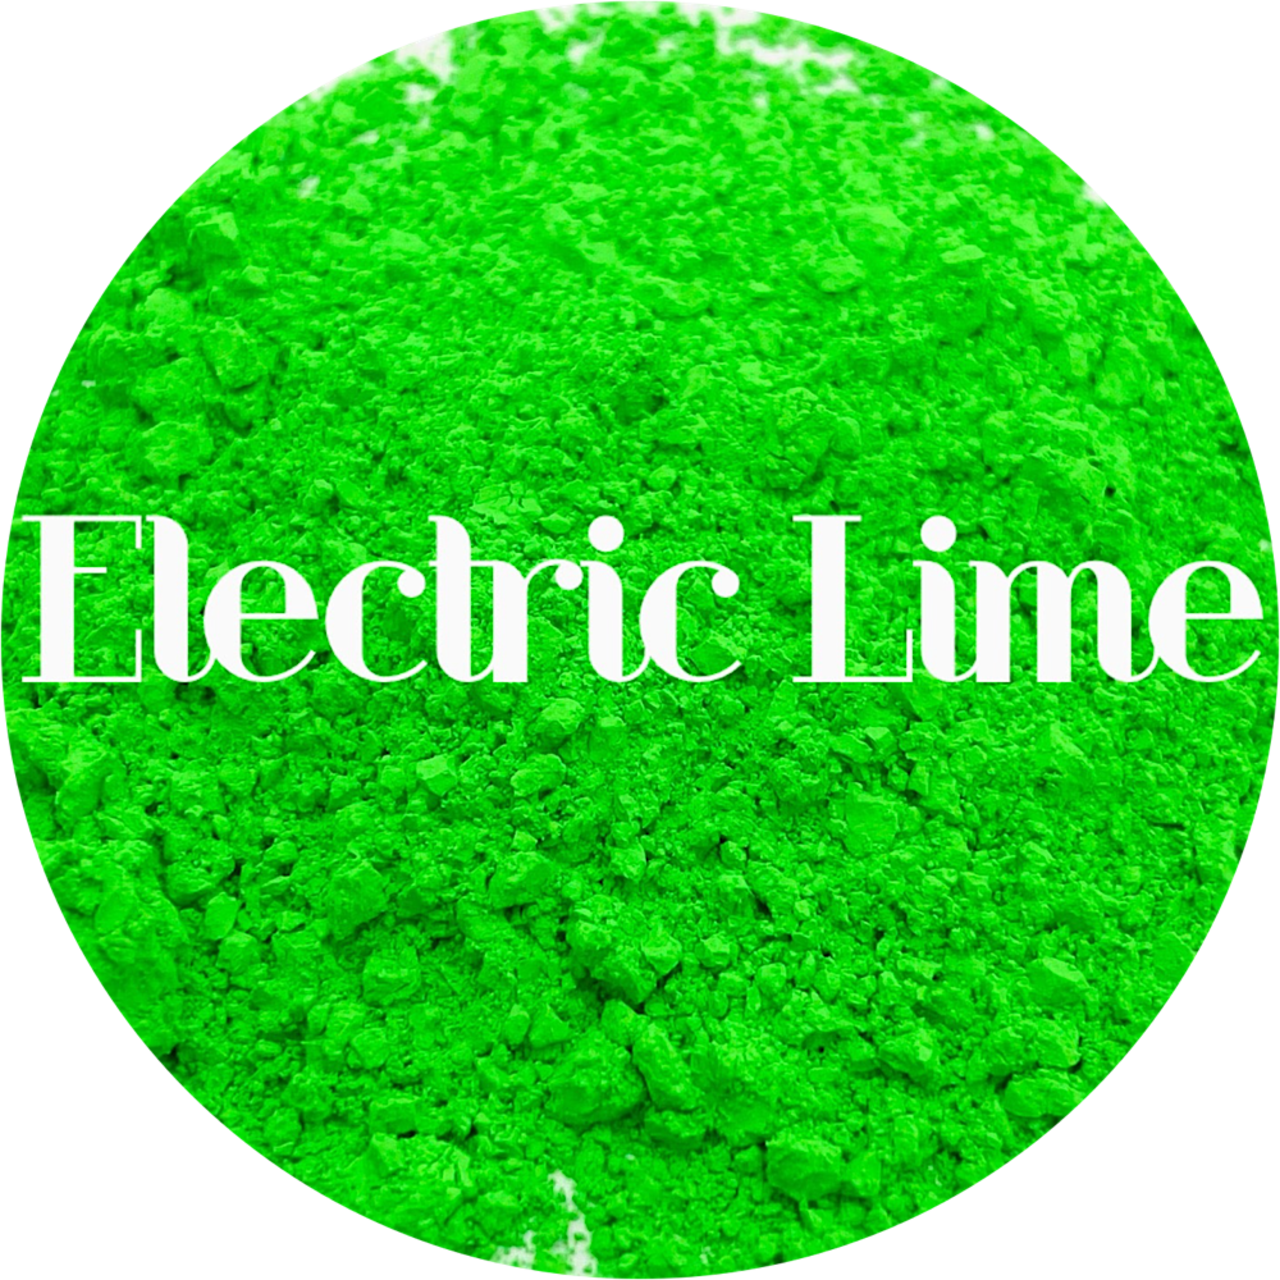 Electric Lime Neon Mica Powder by Glitter Heart Co.™